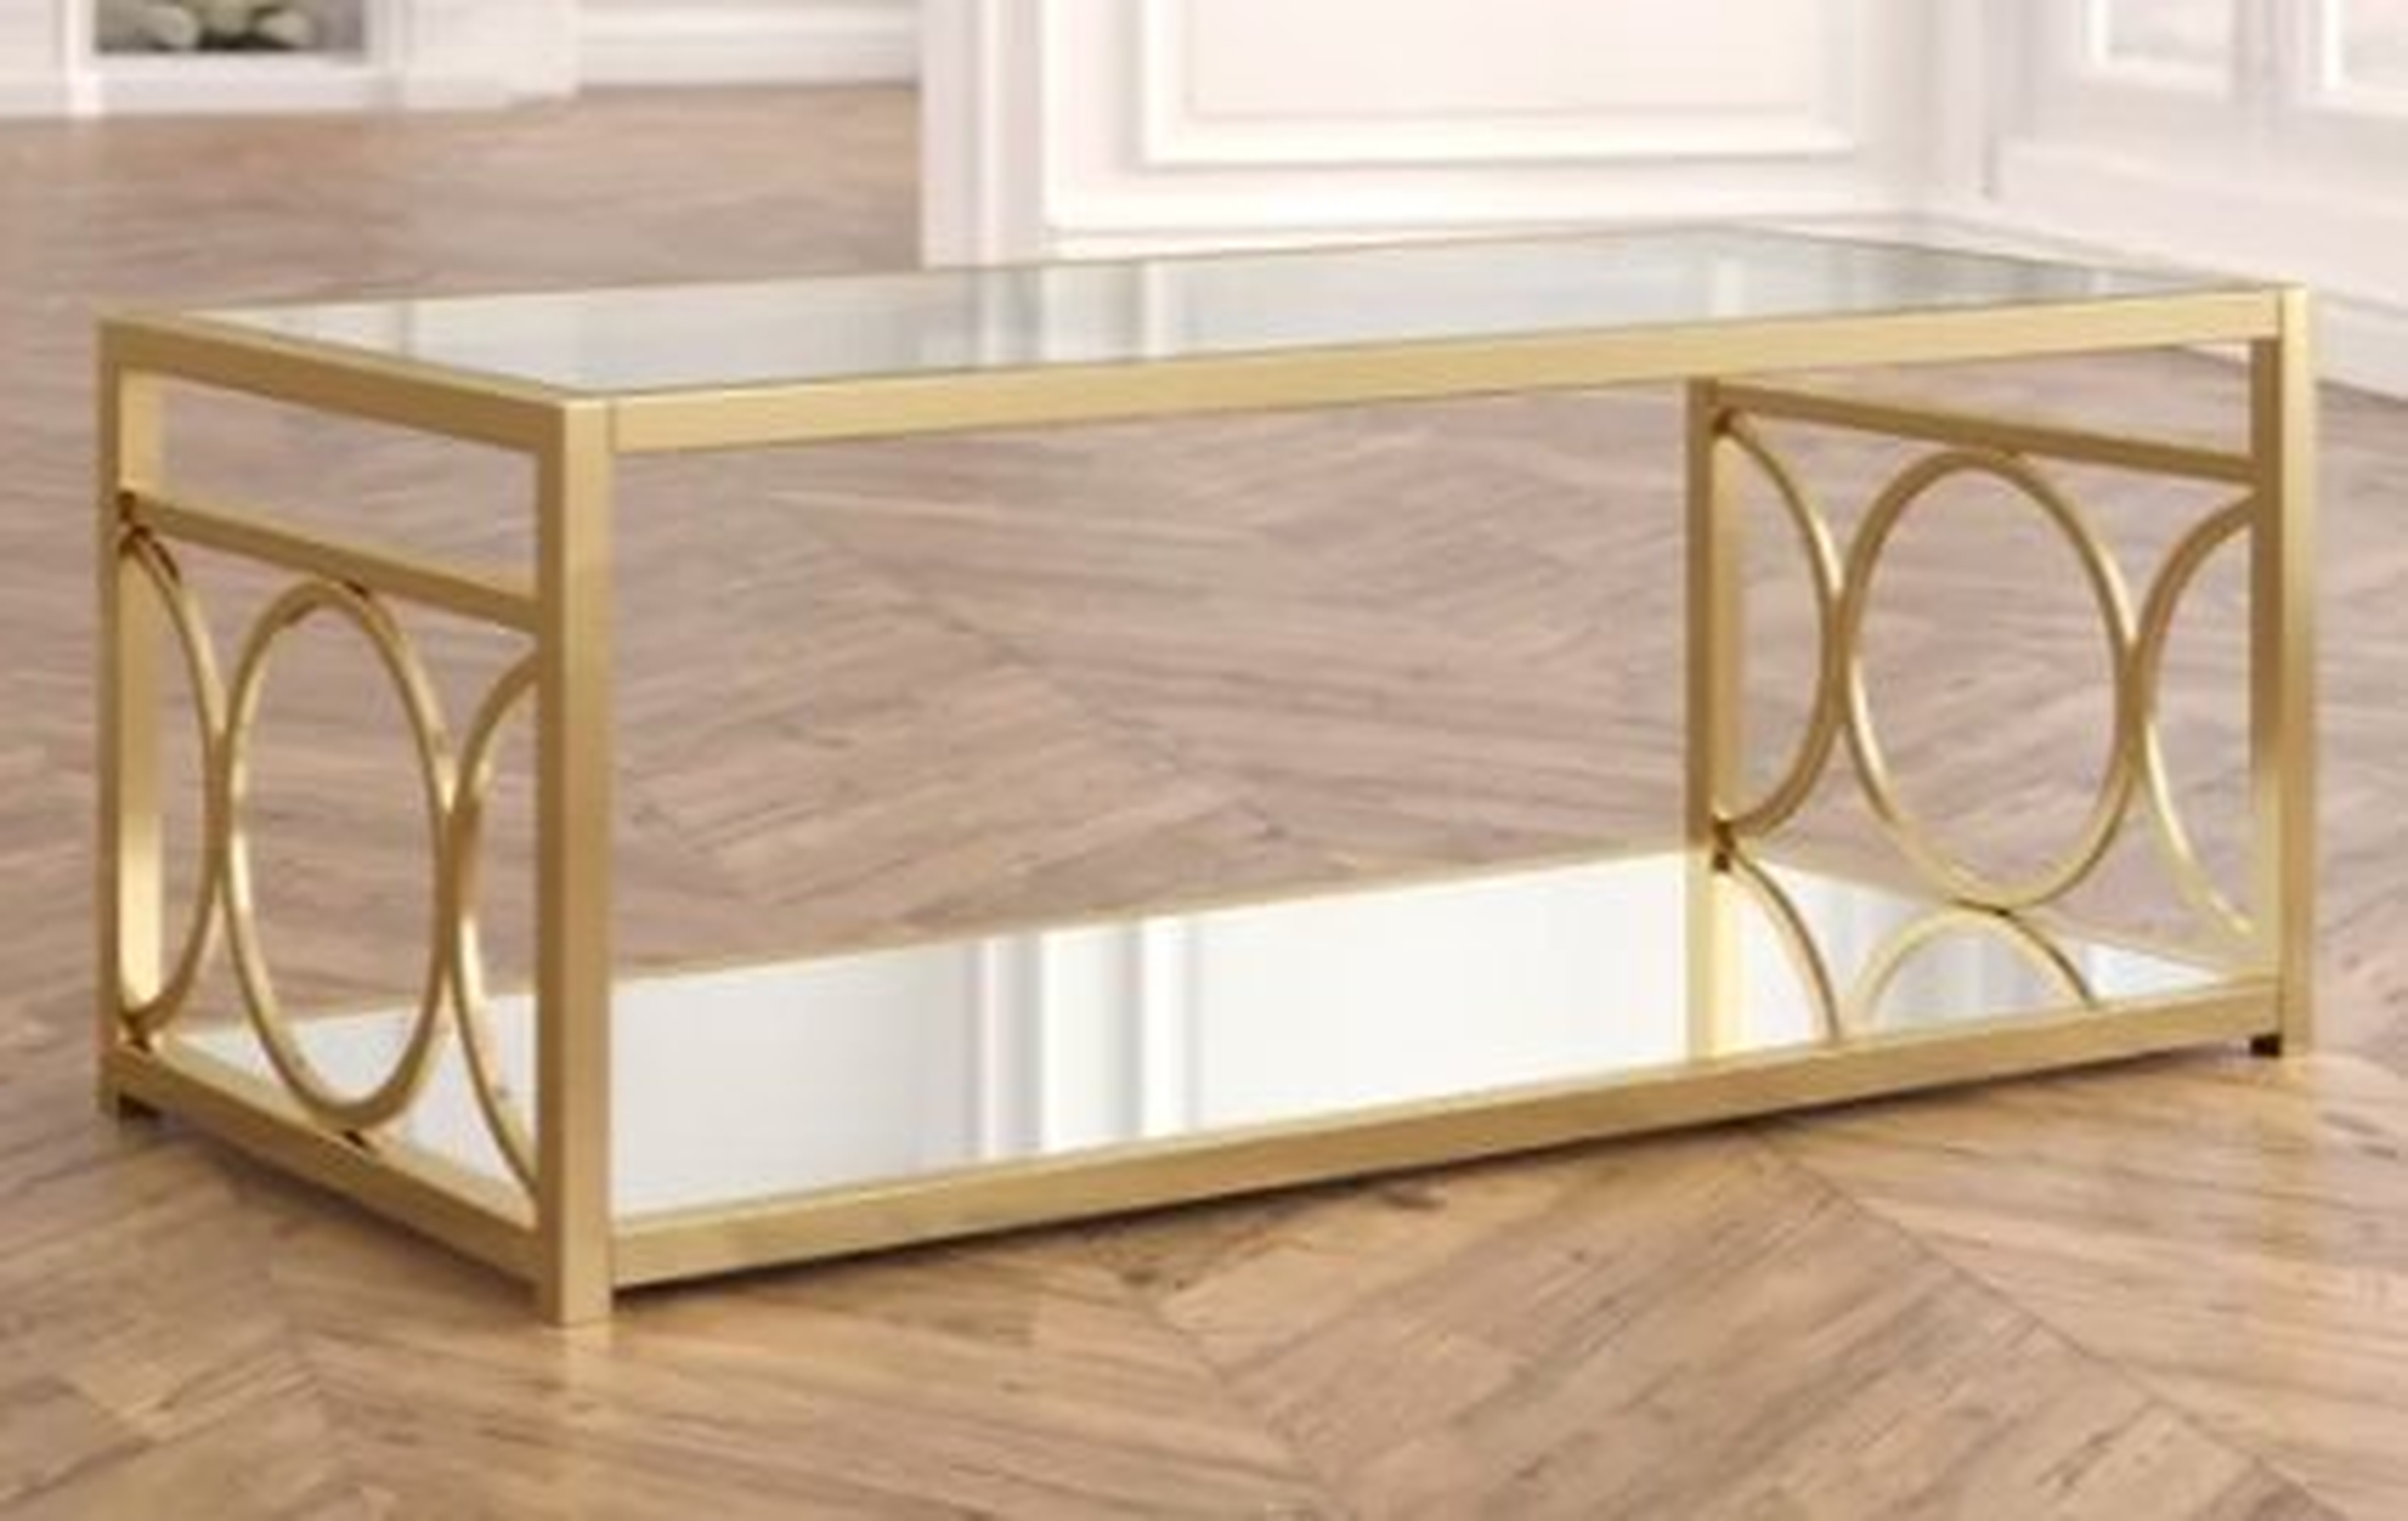 Astor Coffee Table with Storage - Birch Lane